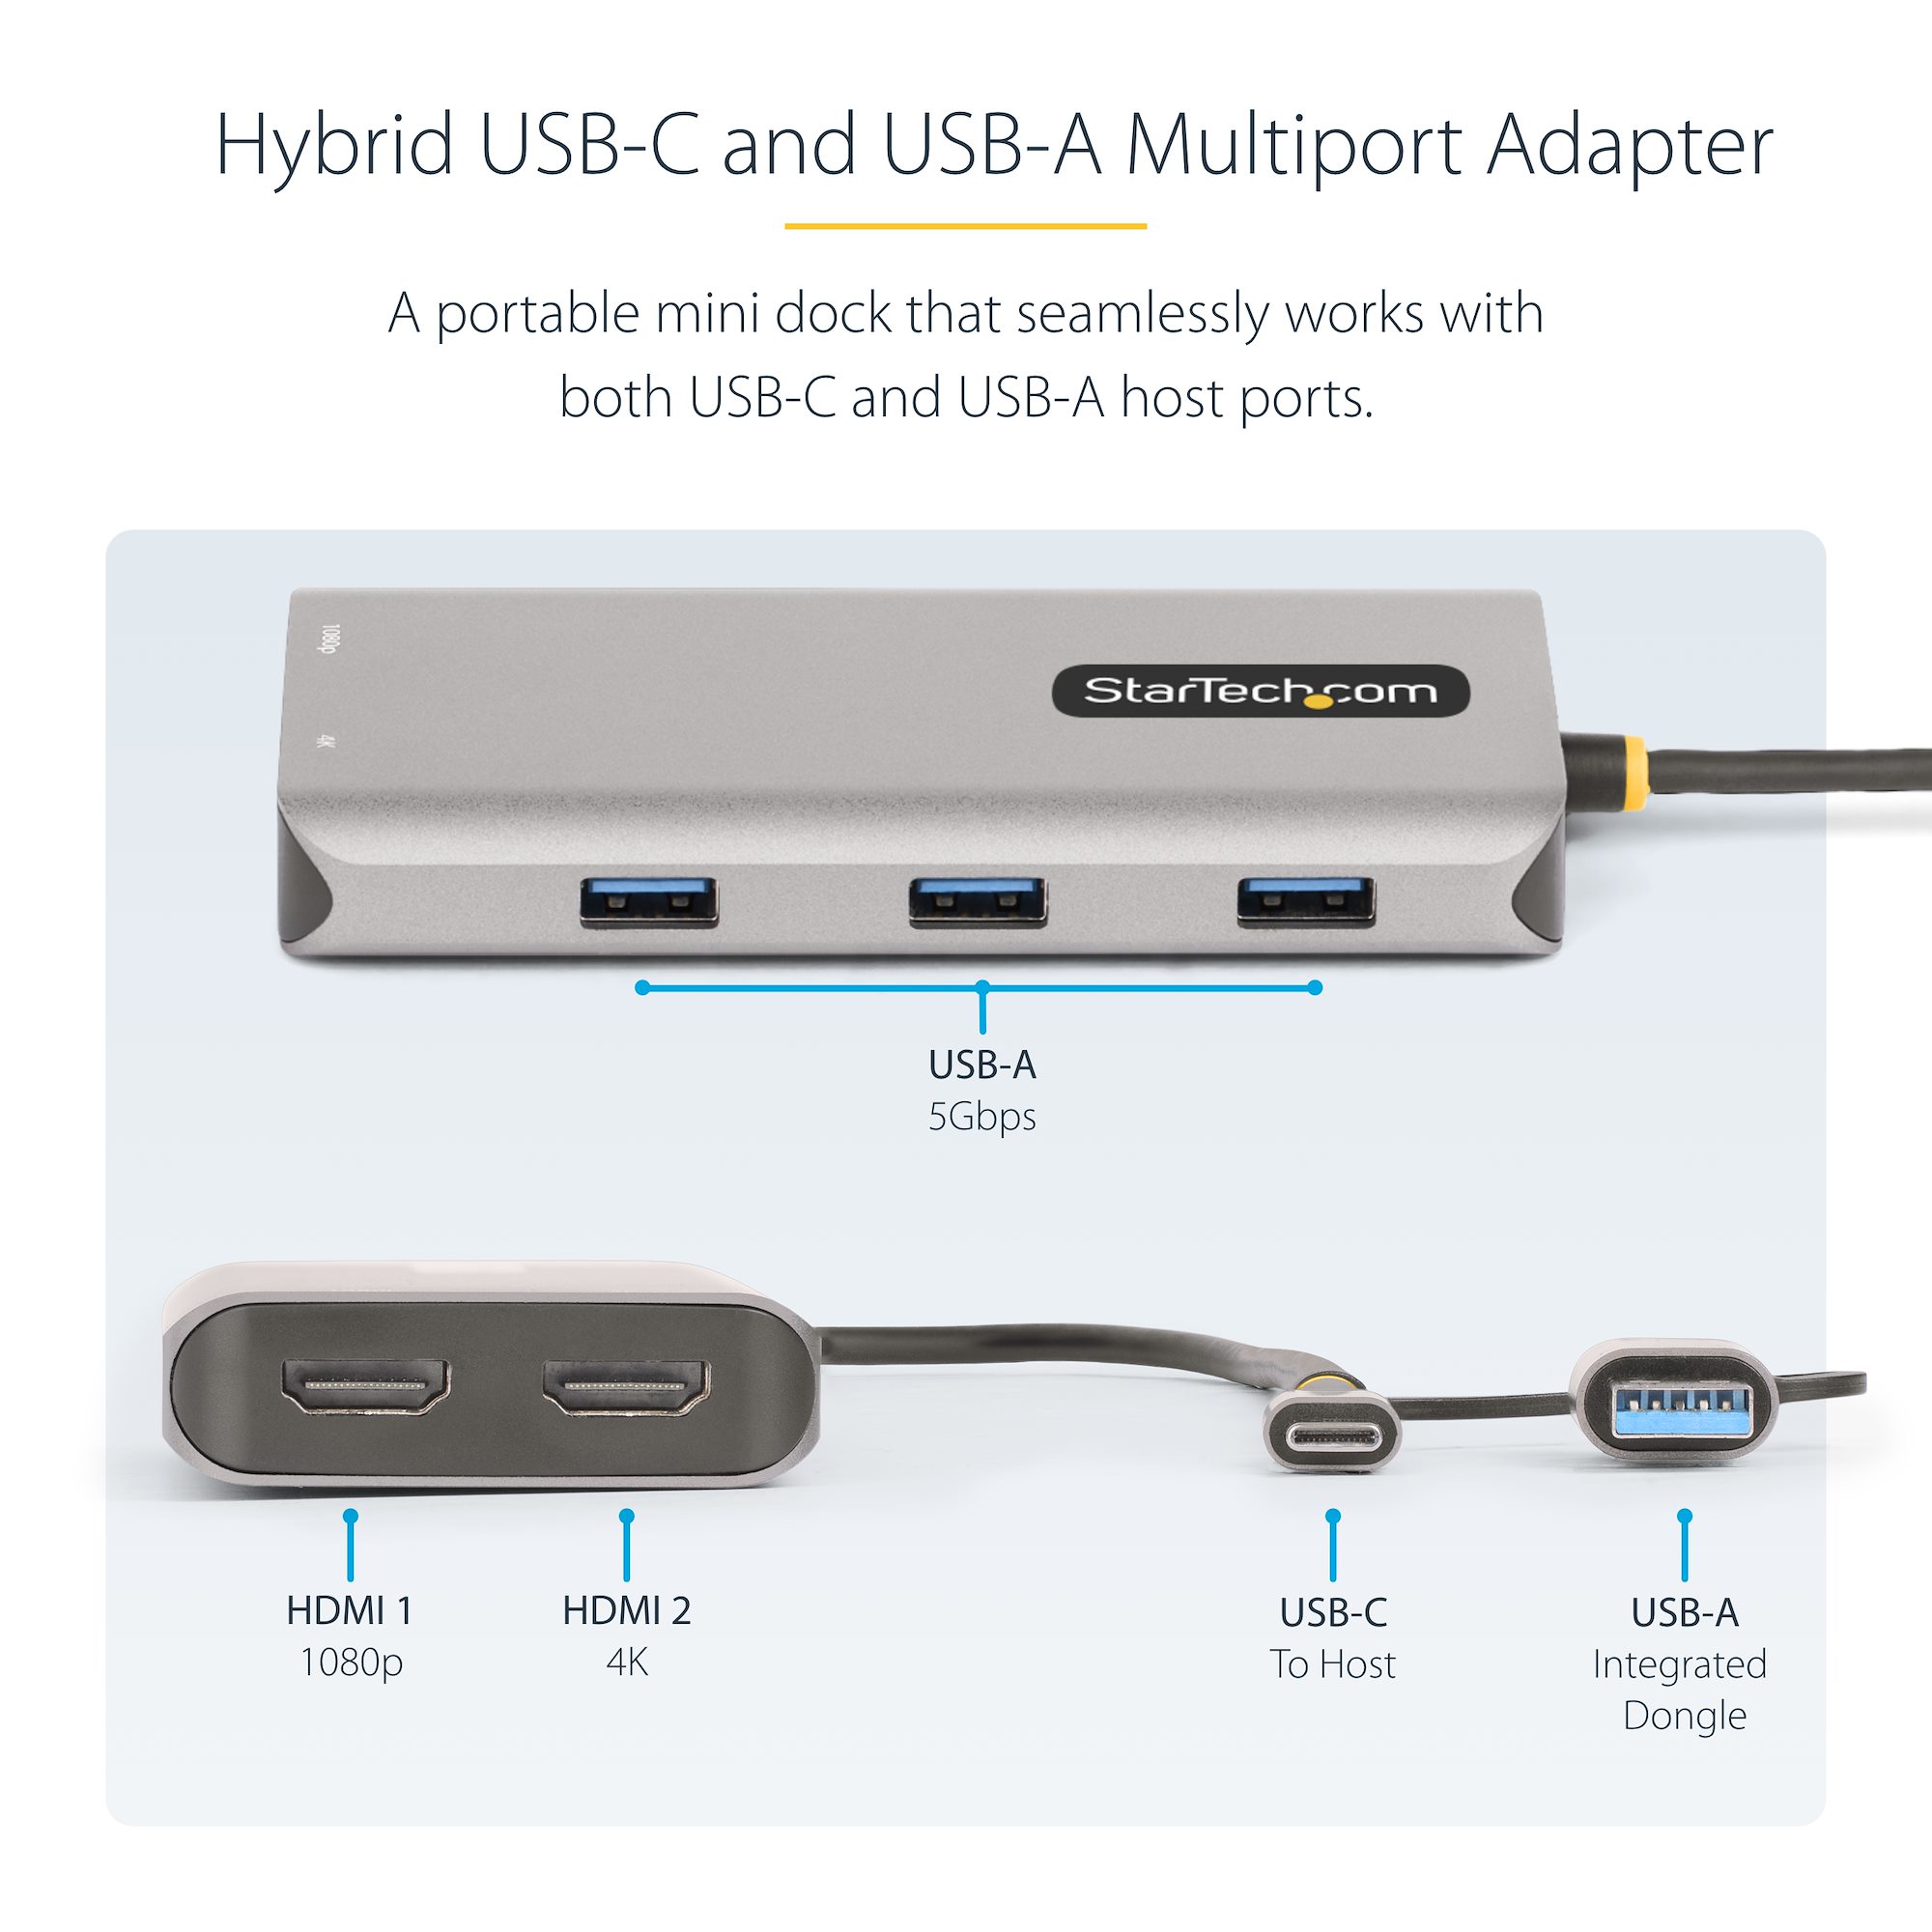 USB-C/USB-A Multiport Adapter, Dual HDMI - USB-C Multiport Adapters, Universal Laptop Docking Stations